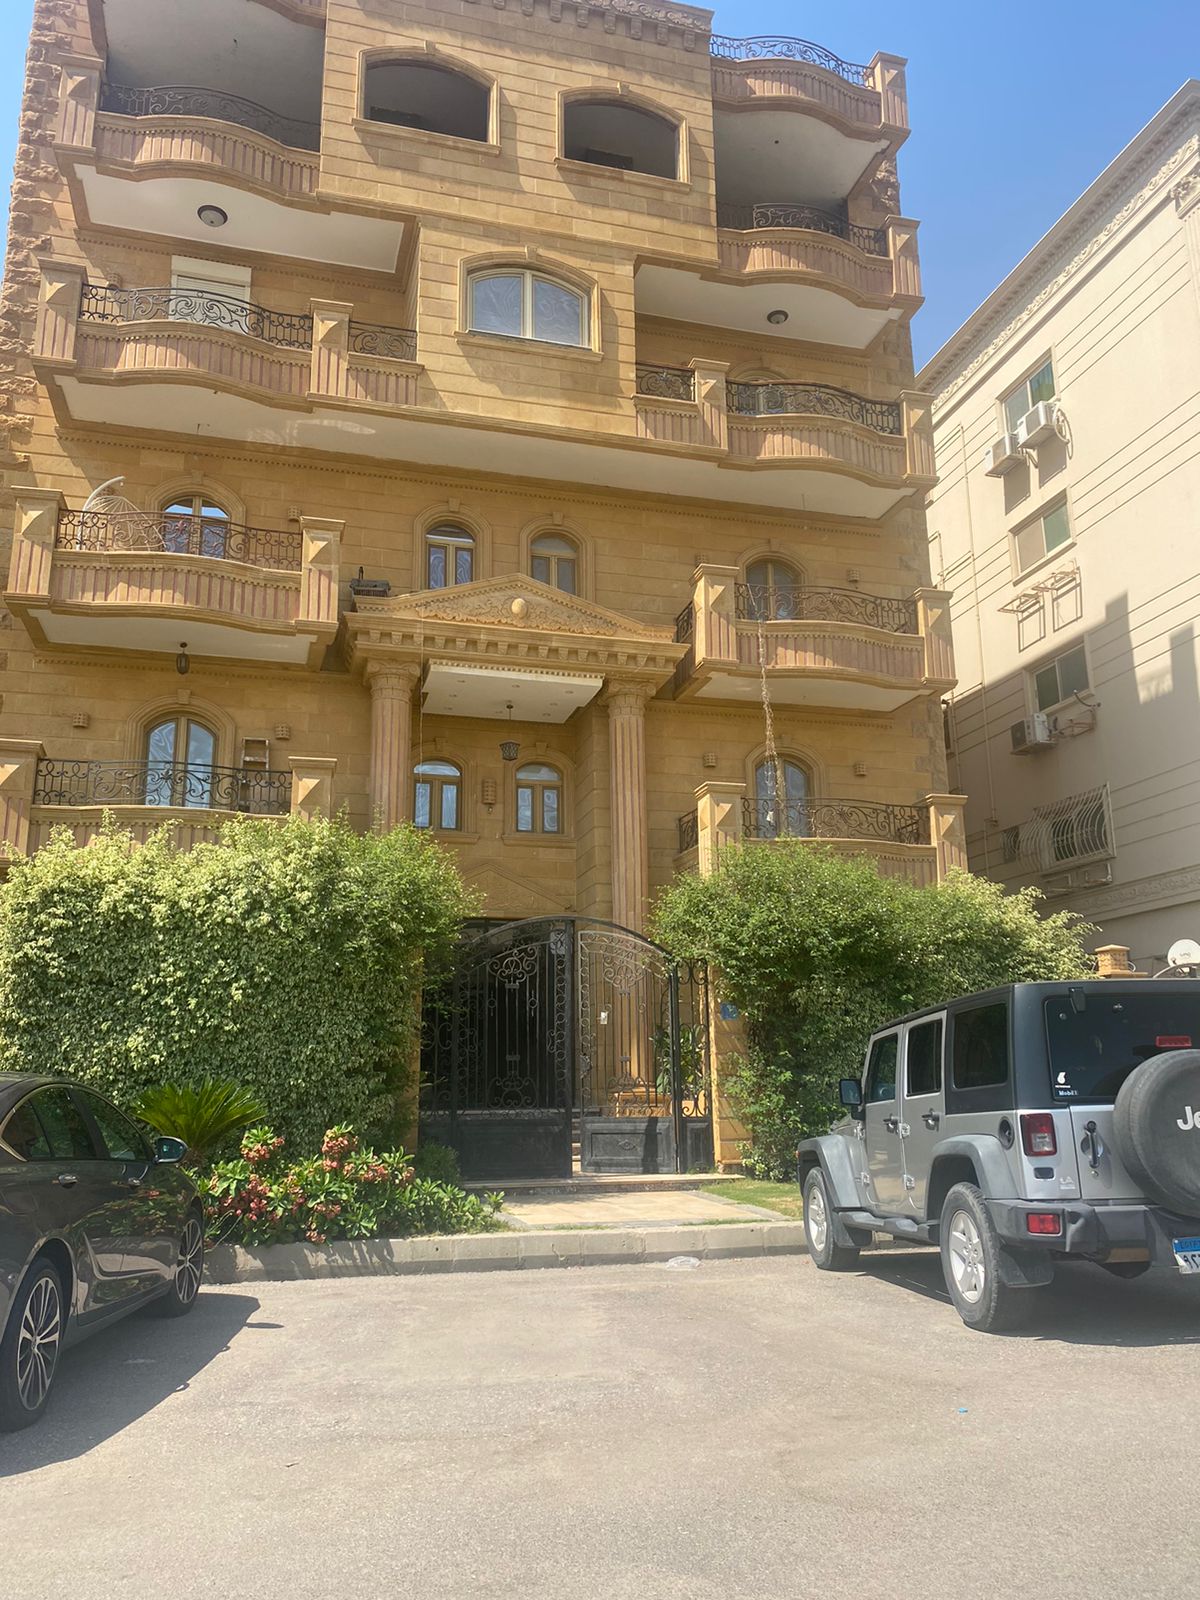 new cairo city , apartment with garden view for sale in al banafsj buildings